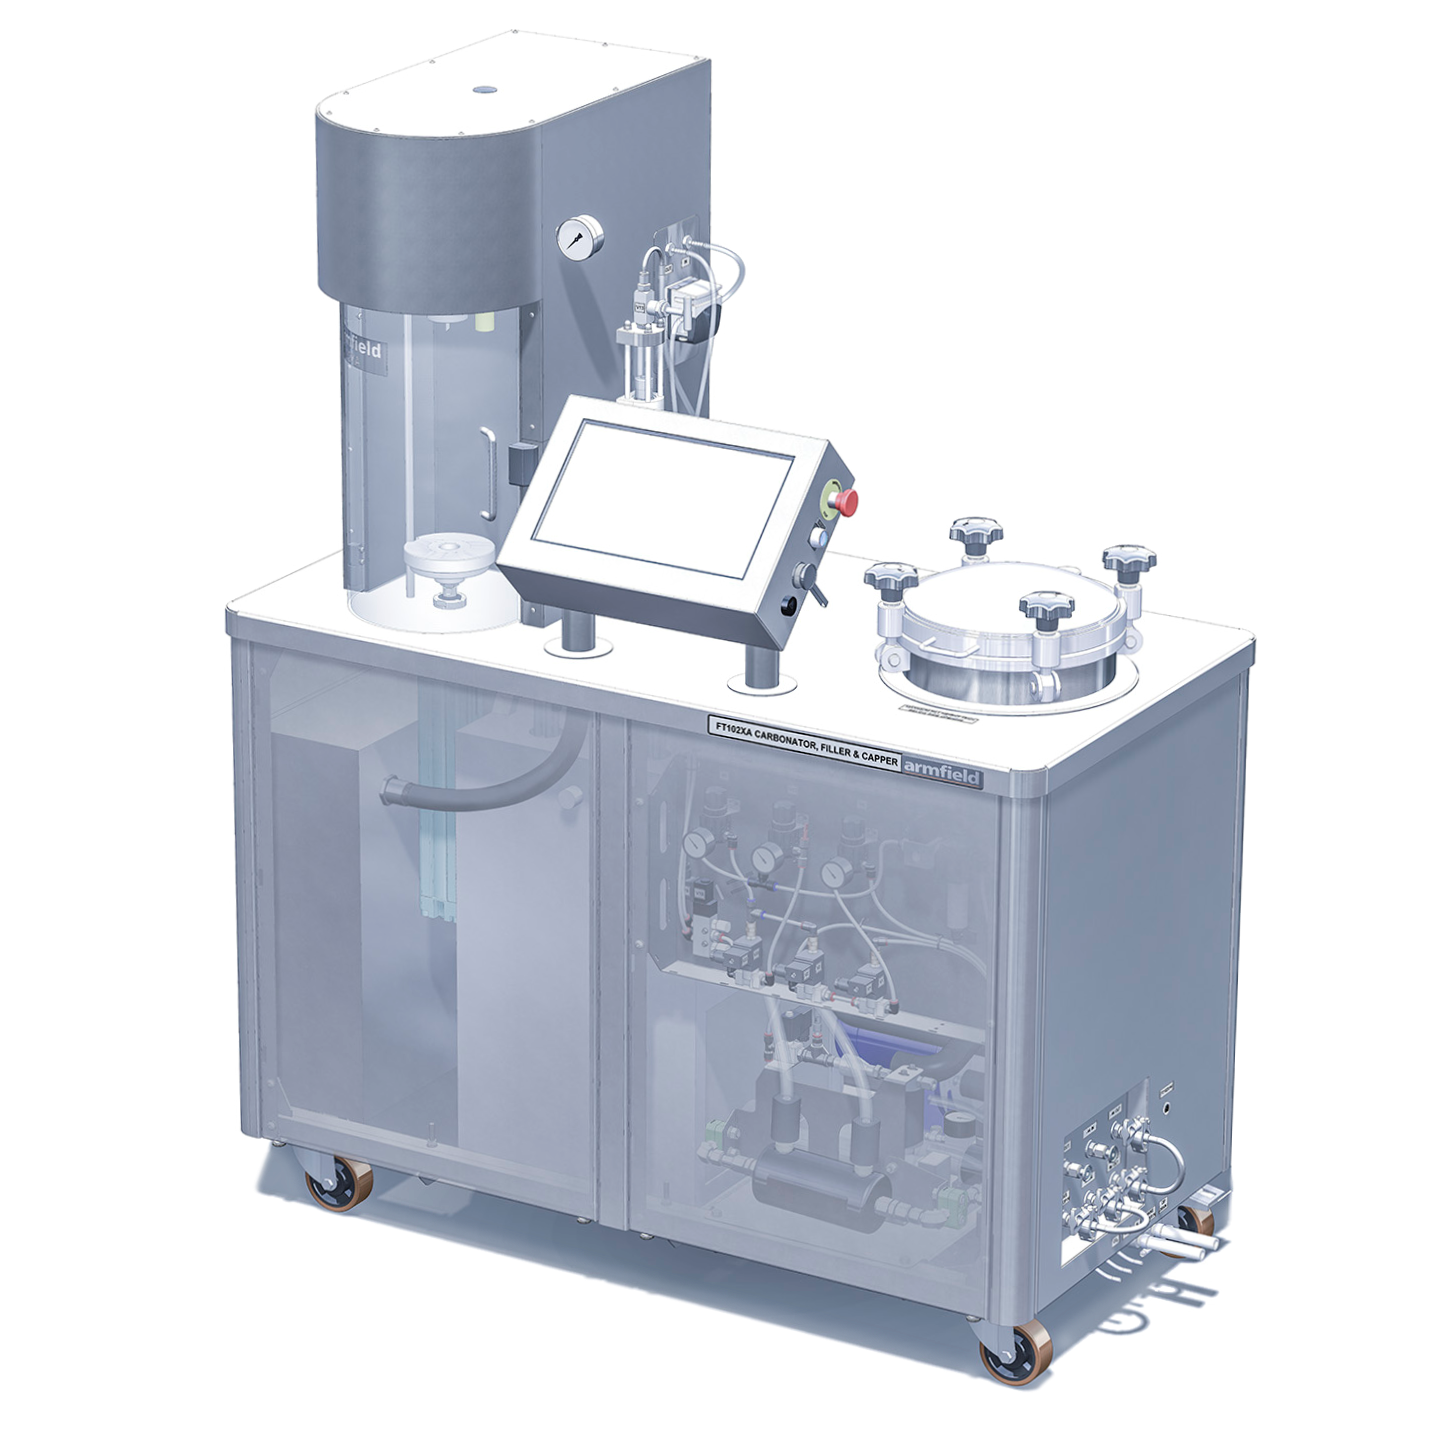 New FT102XA Carbonator and Filler - Designed for small scale bottle and carbonation testing!